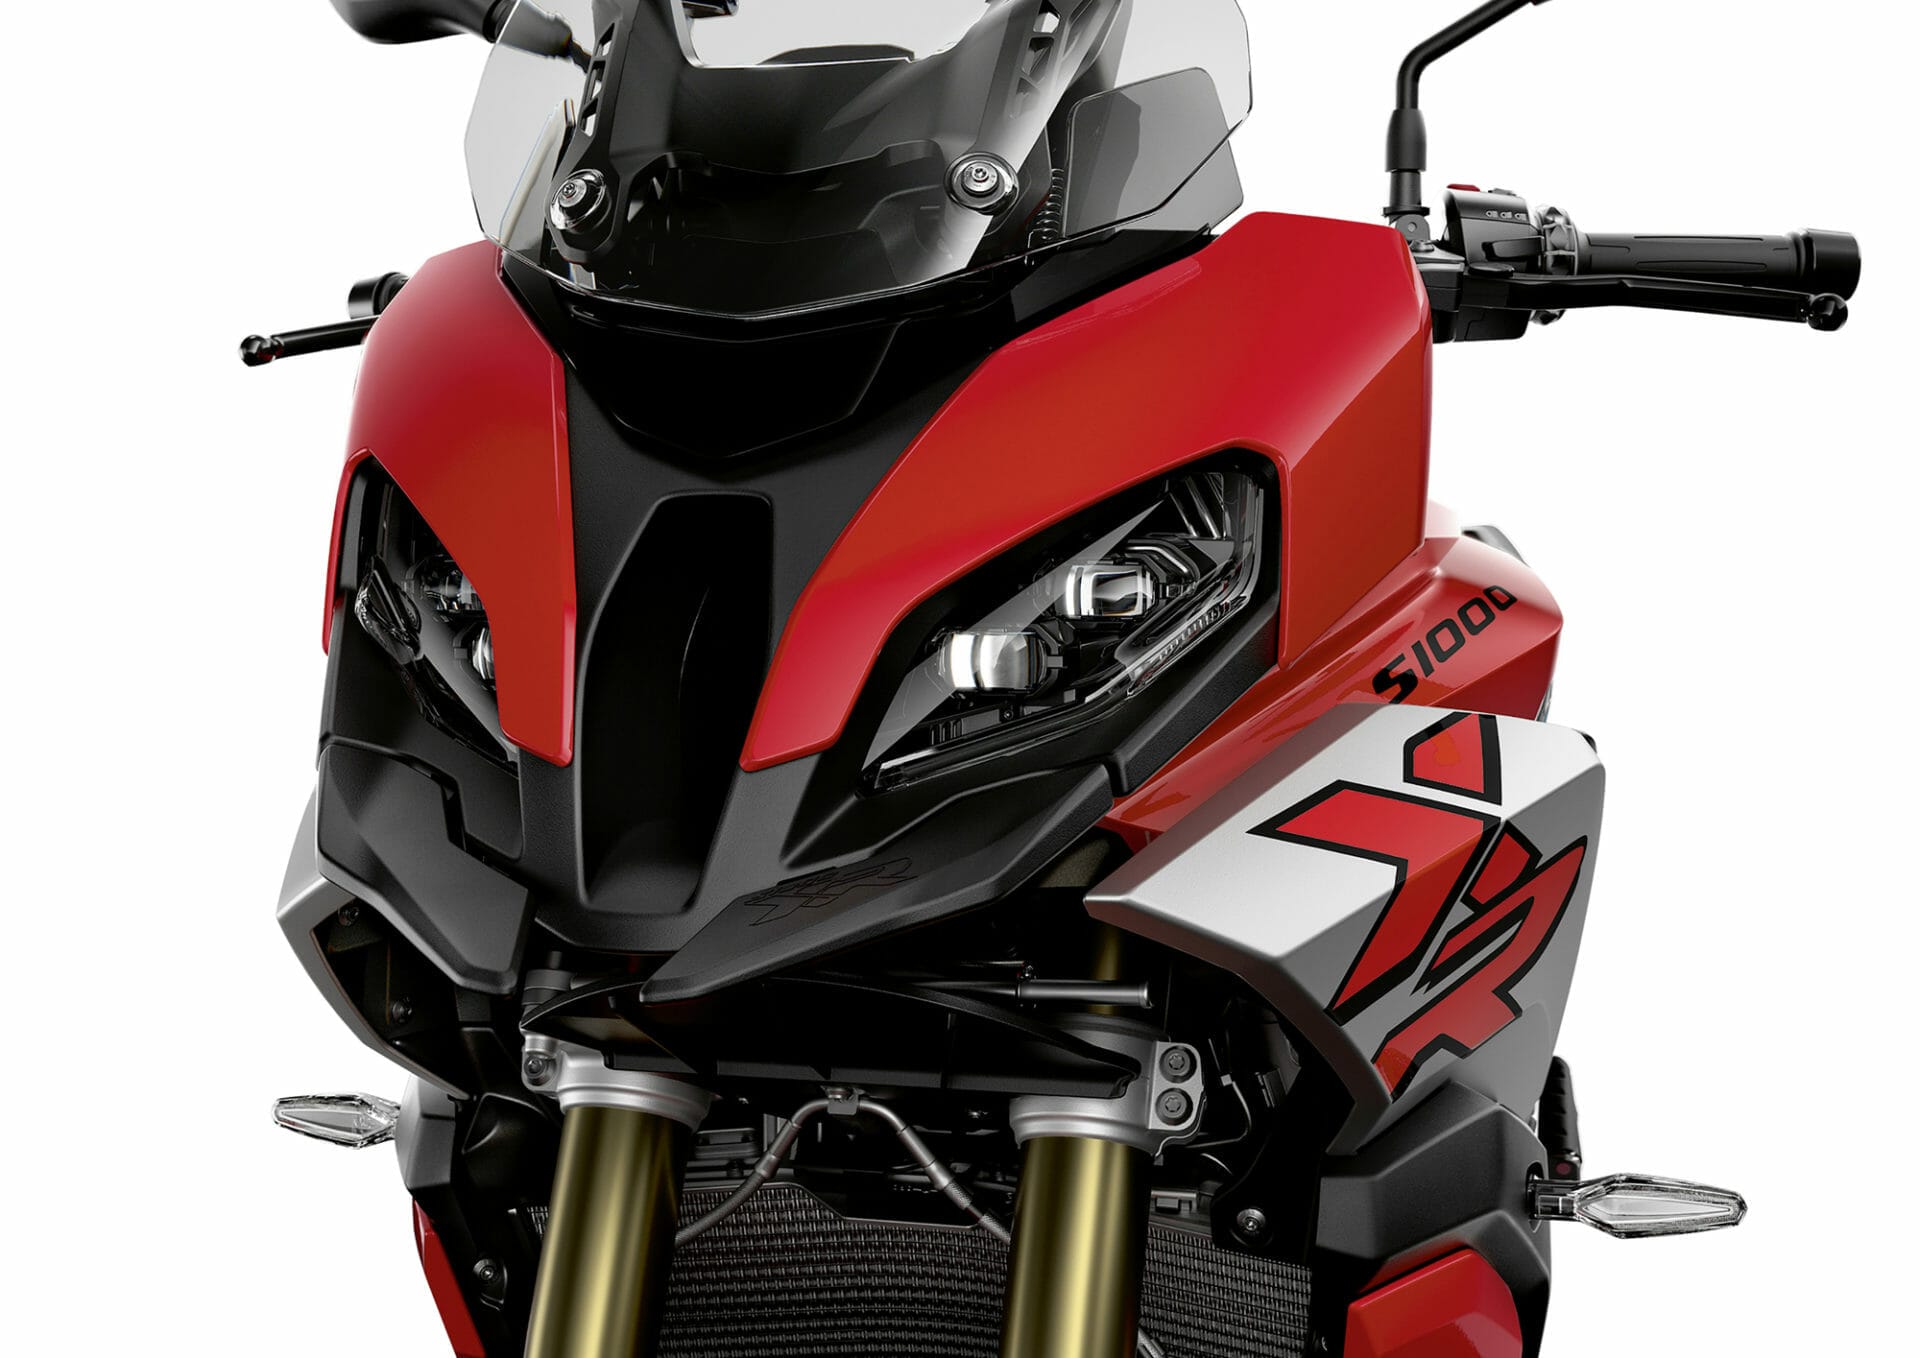 New: #BMW #S1000XR
- also in the app Motorcycle News